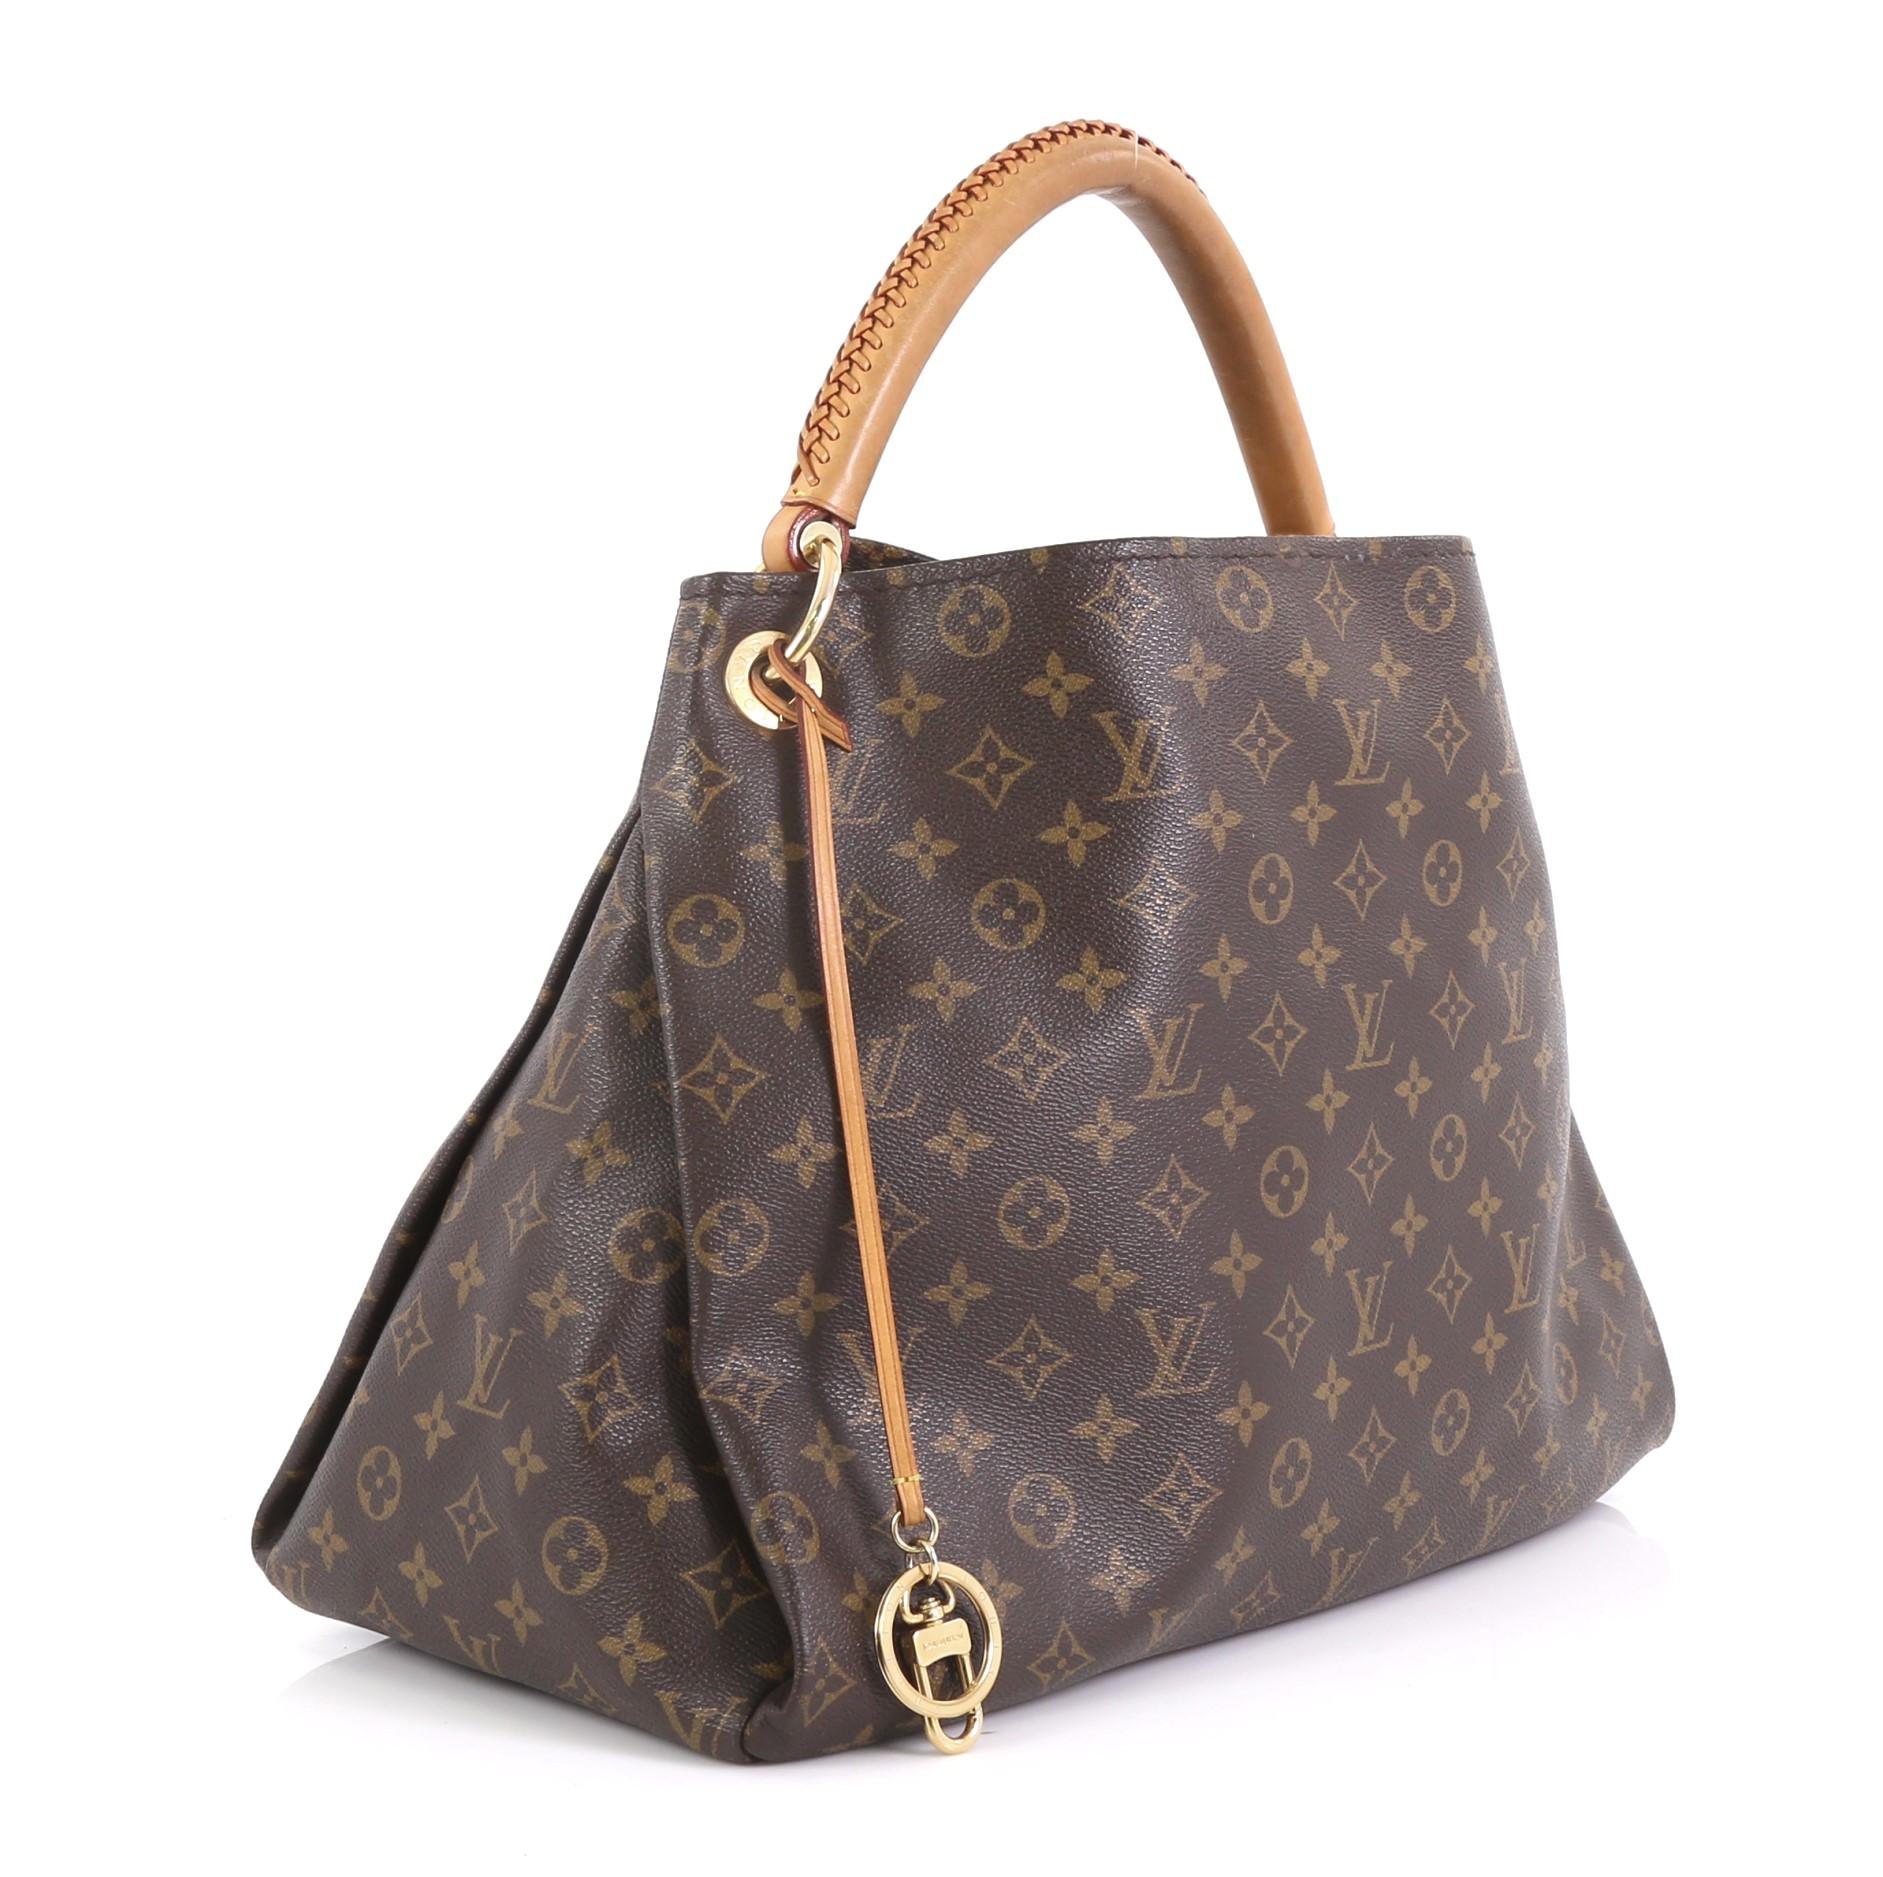 This Louis Vuitton Artsy Handbag Monogram Canvas MM, crafted from brown monogram coated canvas, features rolled leather handle with braided detailing, protective base studs, and gold-tone hardware. It opens to a beige microfiber interior with side